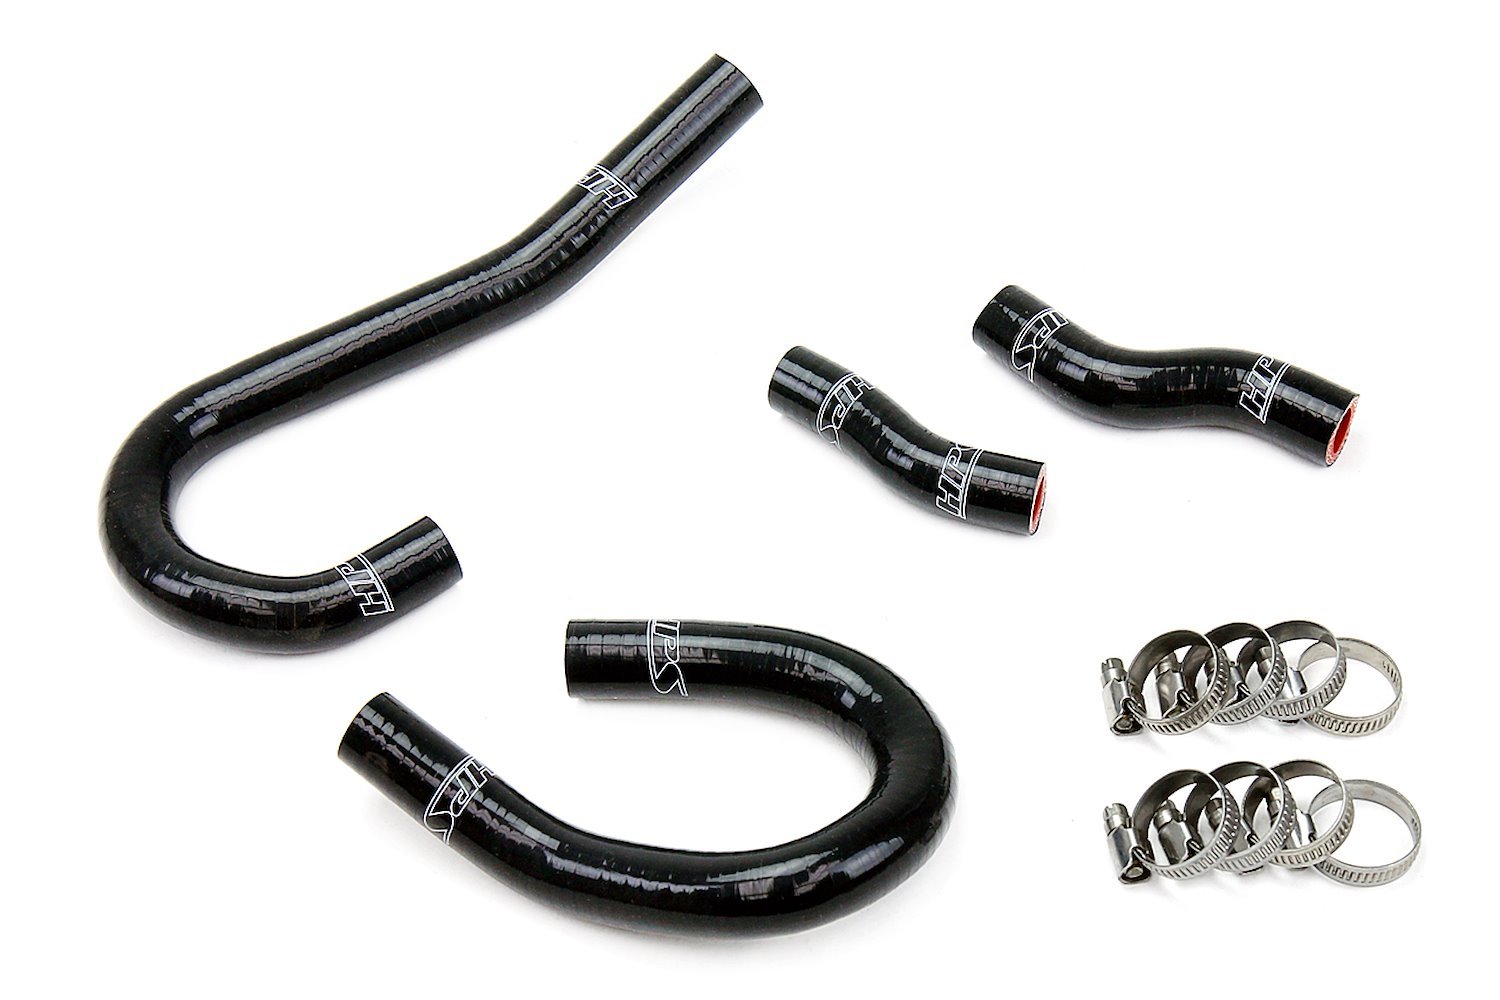 57-1473-BLK Heater Hose Kit, High-Temp 3-Ply Reinforced Silicone, Replace OEM Rubber Heater Coolant Hoses